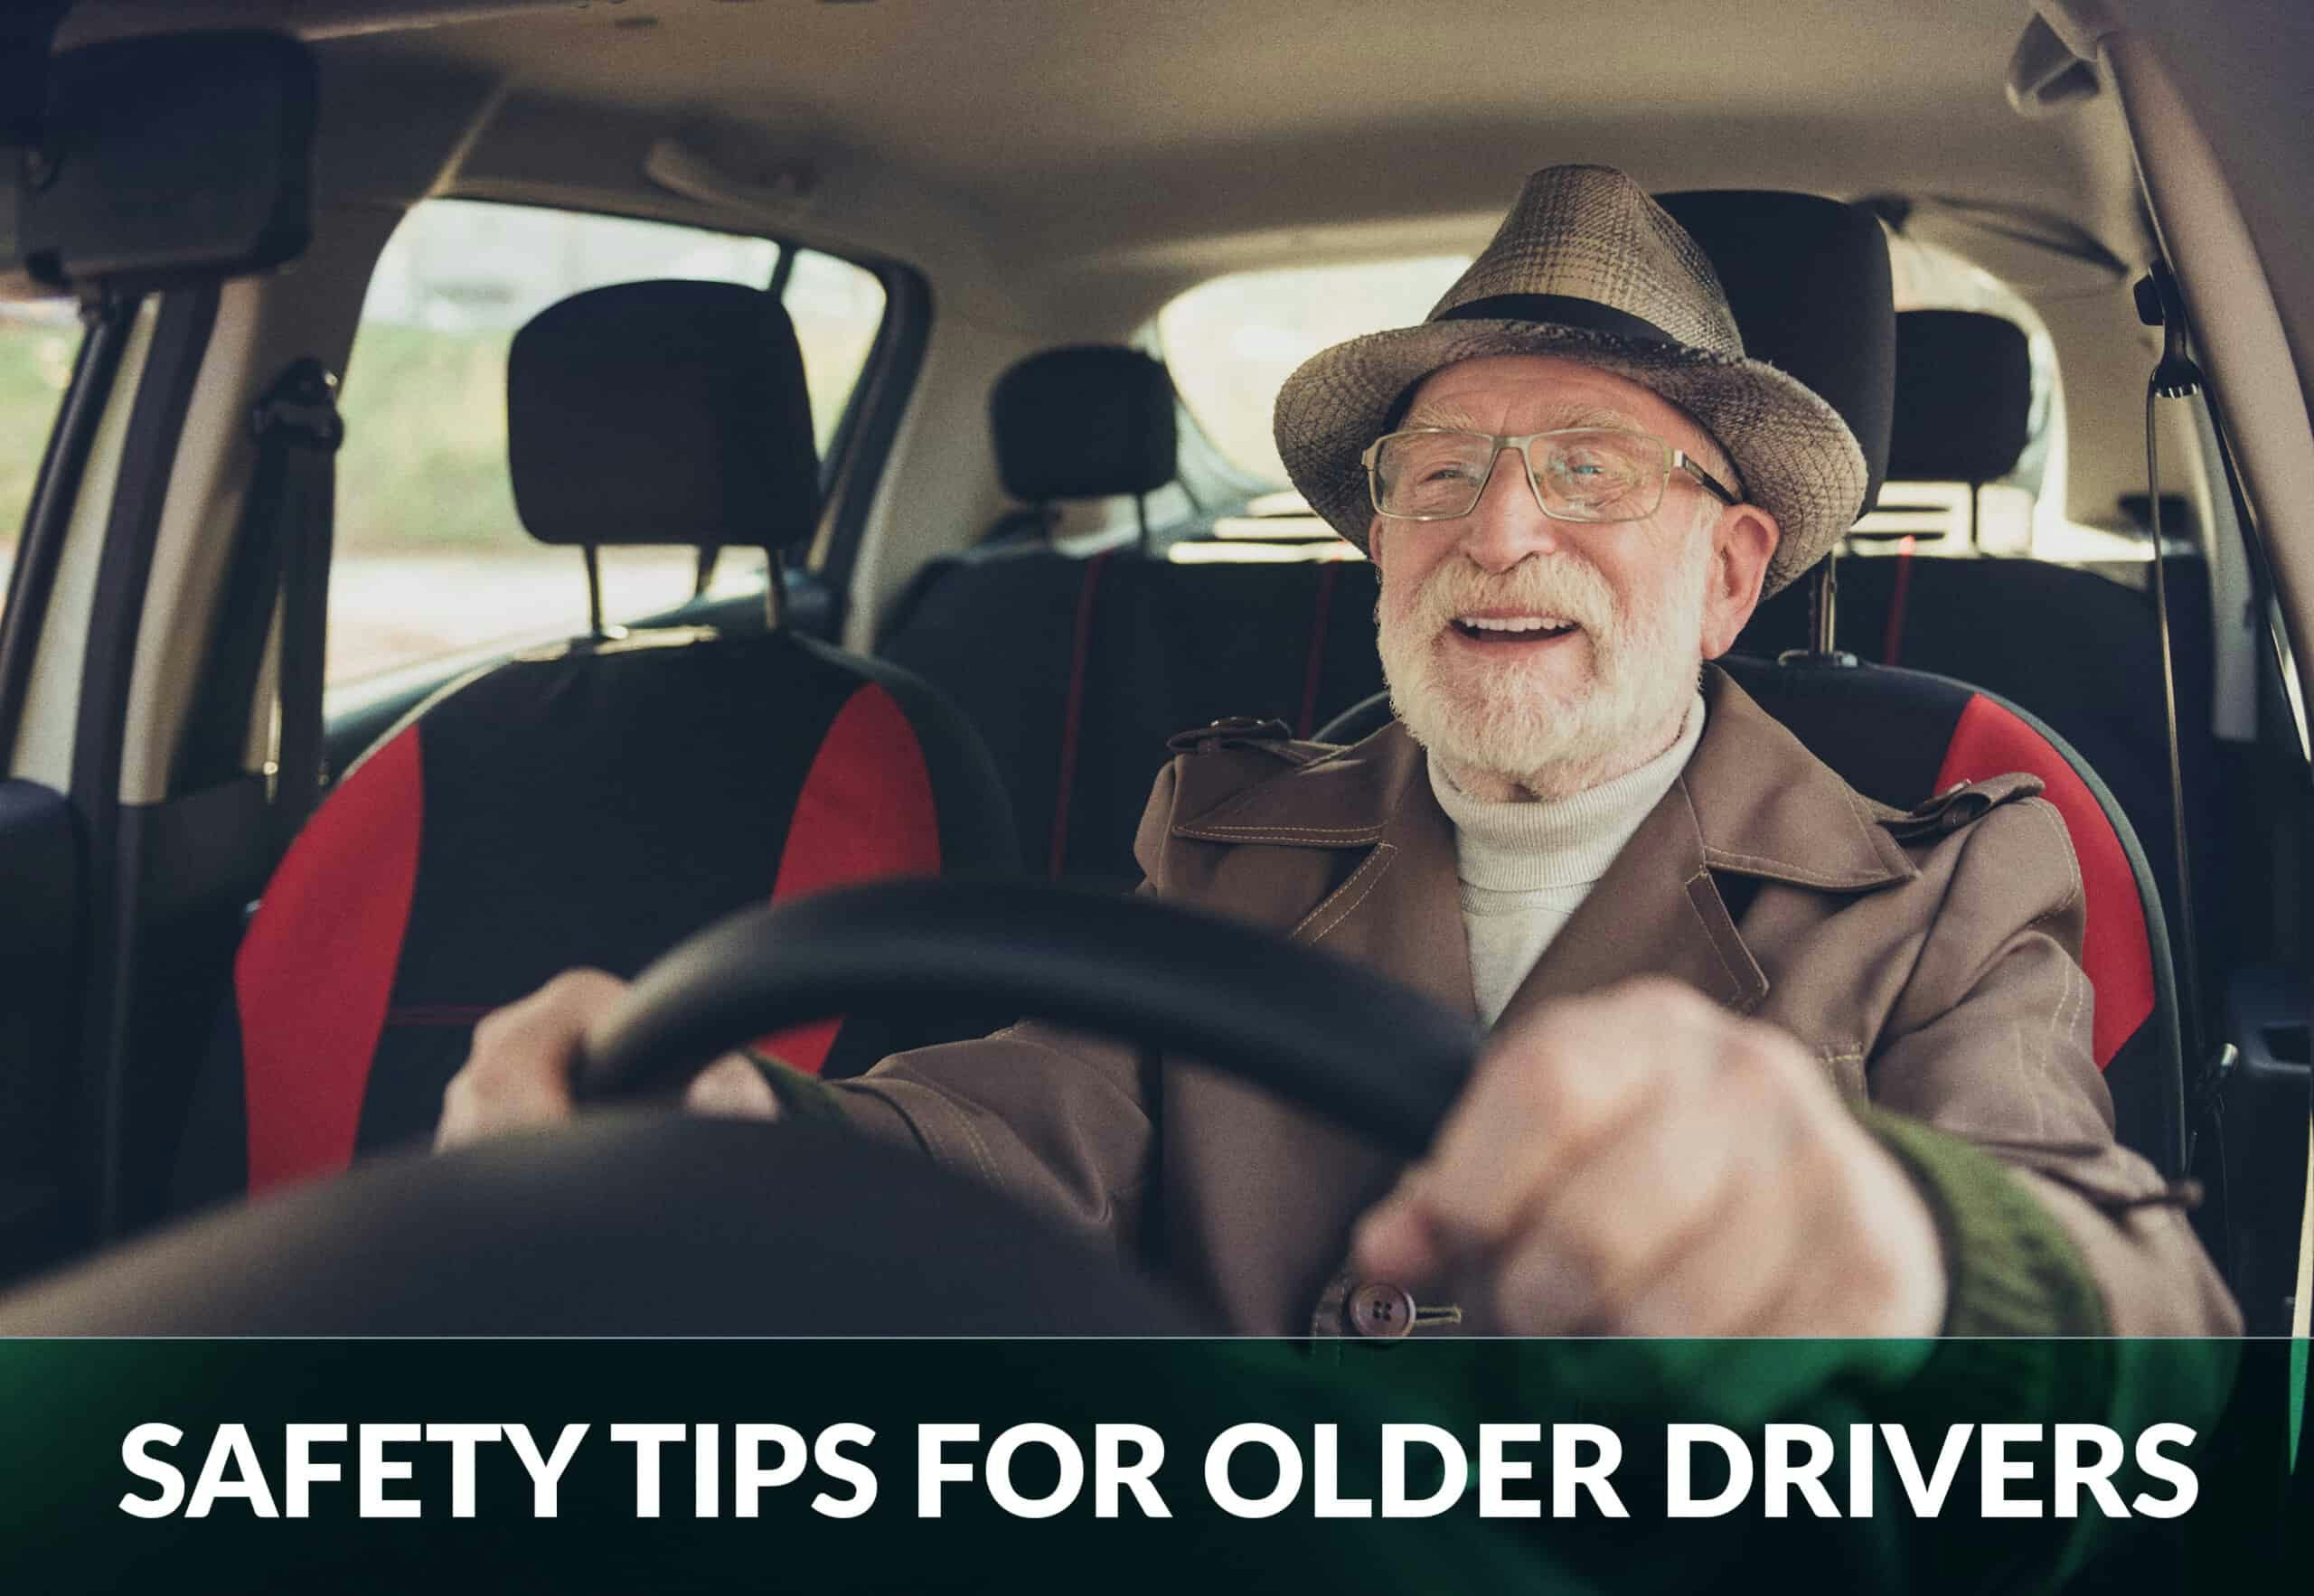 Tips for safe driving for the elderly - Common Challenges Faced by Elderly Drivers